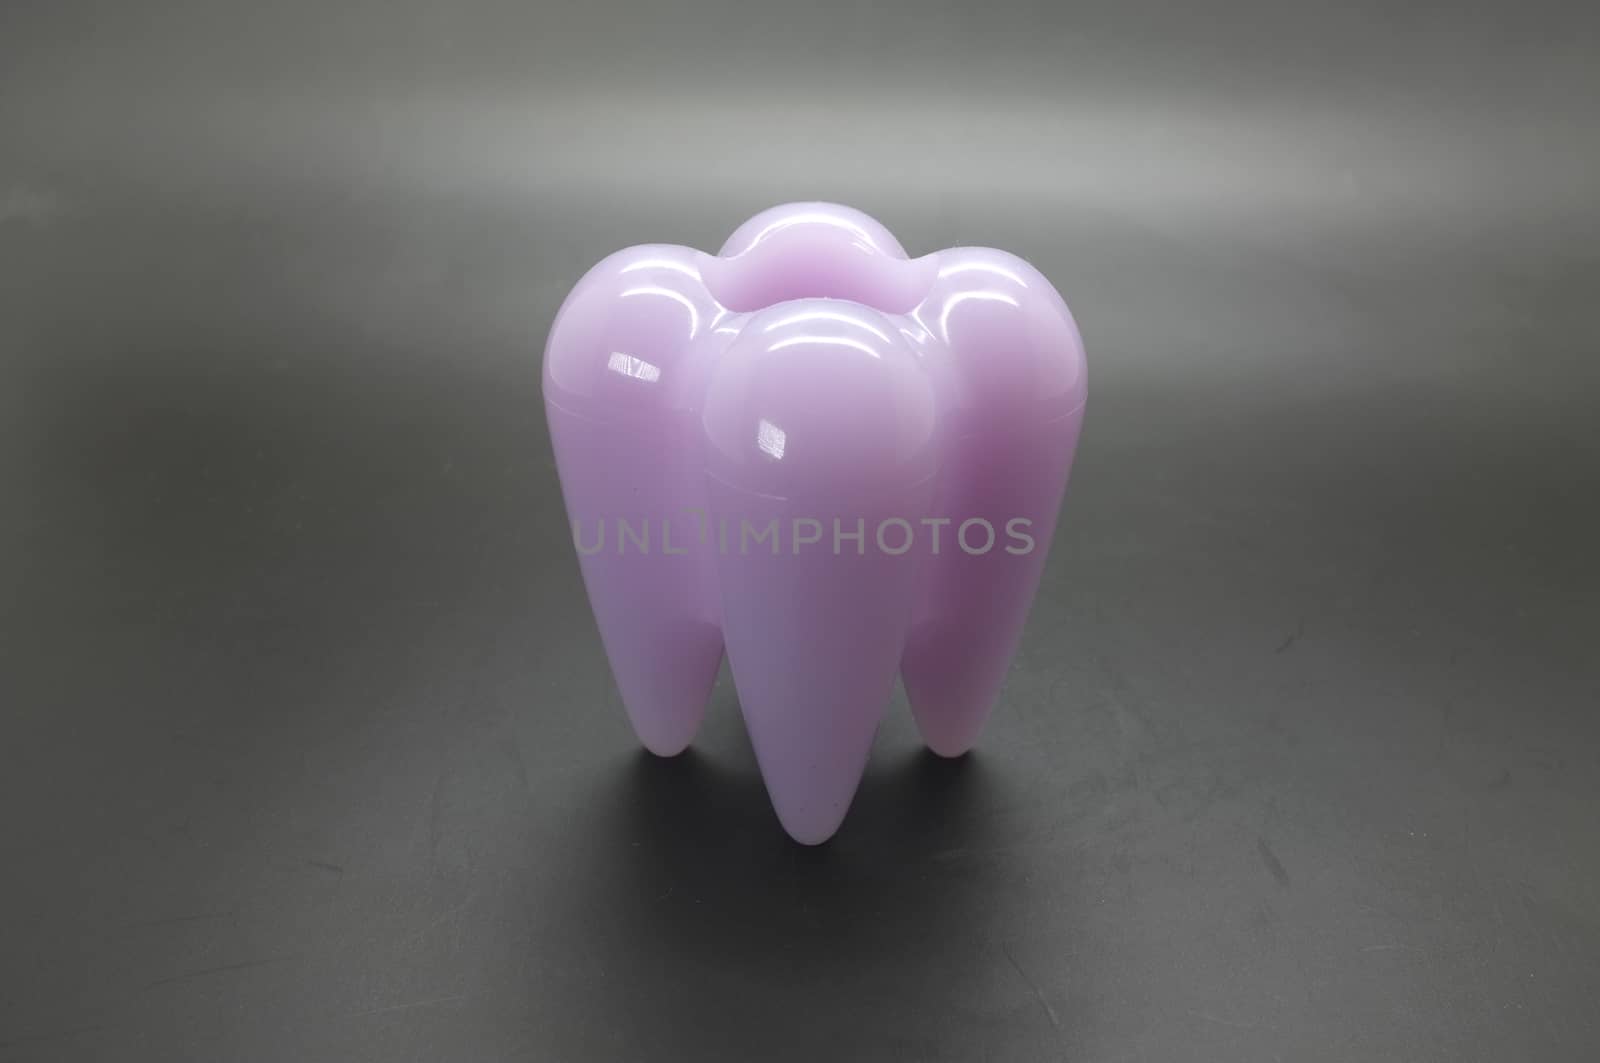 Human tooth model with hole